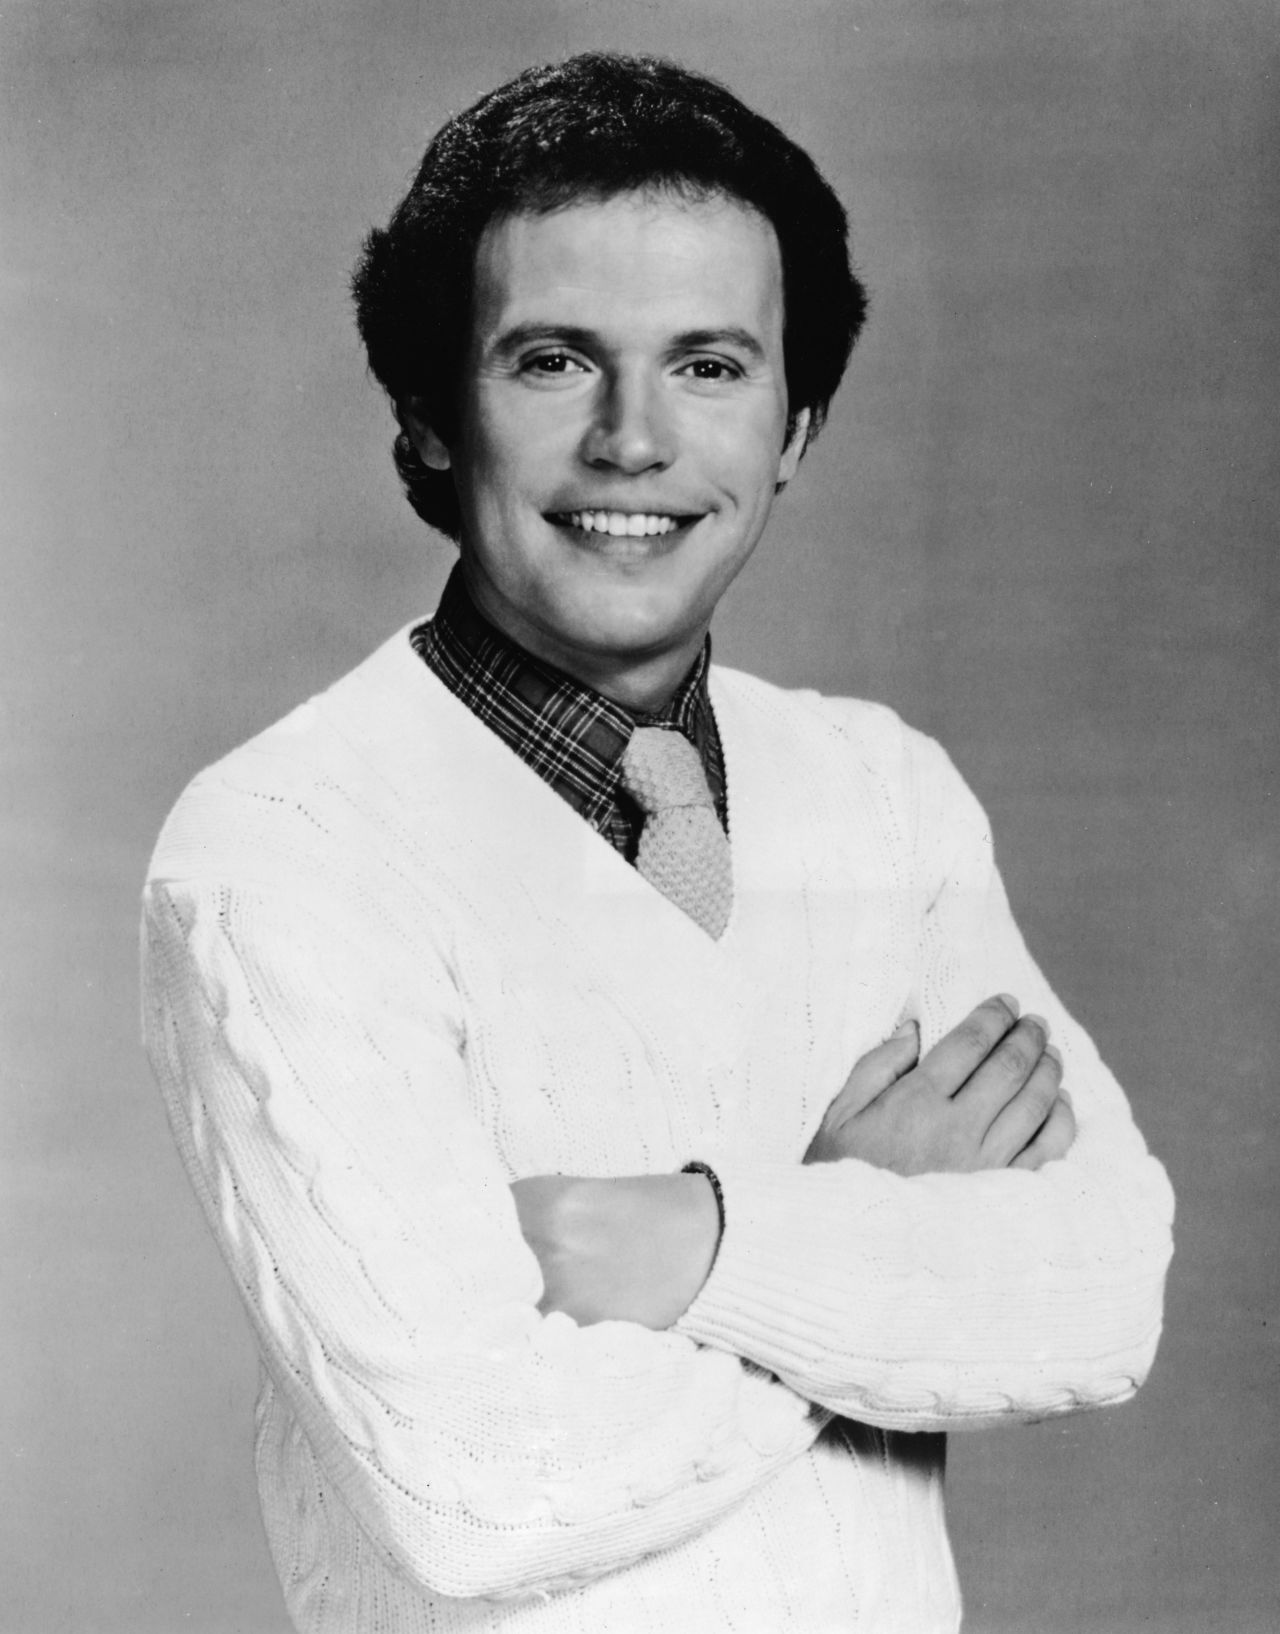 On "Soap," Jodie Dallas became one of TV's first LGBT characters. Played by Billy Crystal, Dallas was gay but had relationships with women throughout the ABC show's four seasons, which aired during the late '70s and early '80s. Dallas also fathered a child named Wendy.